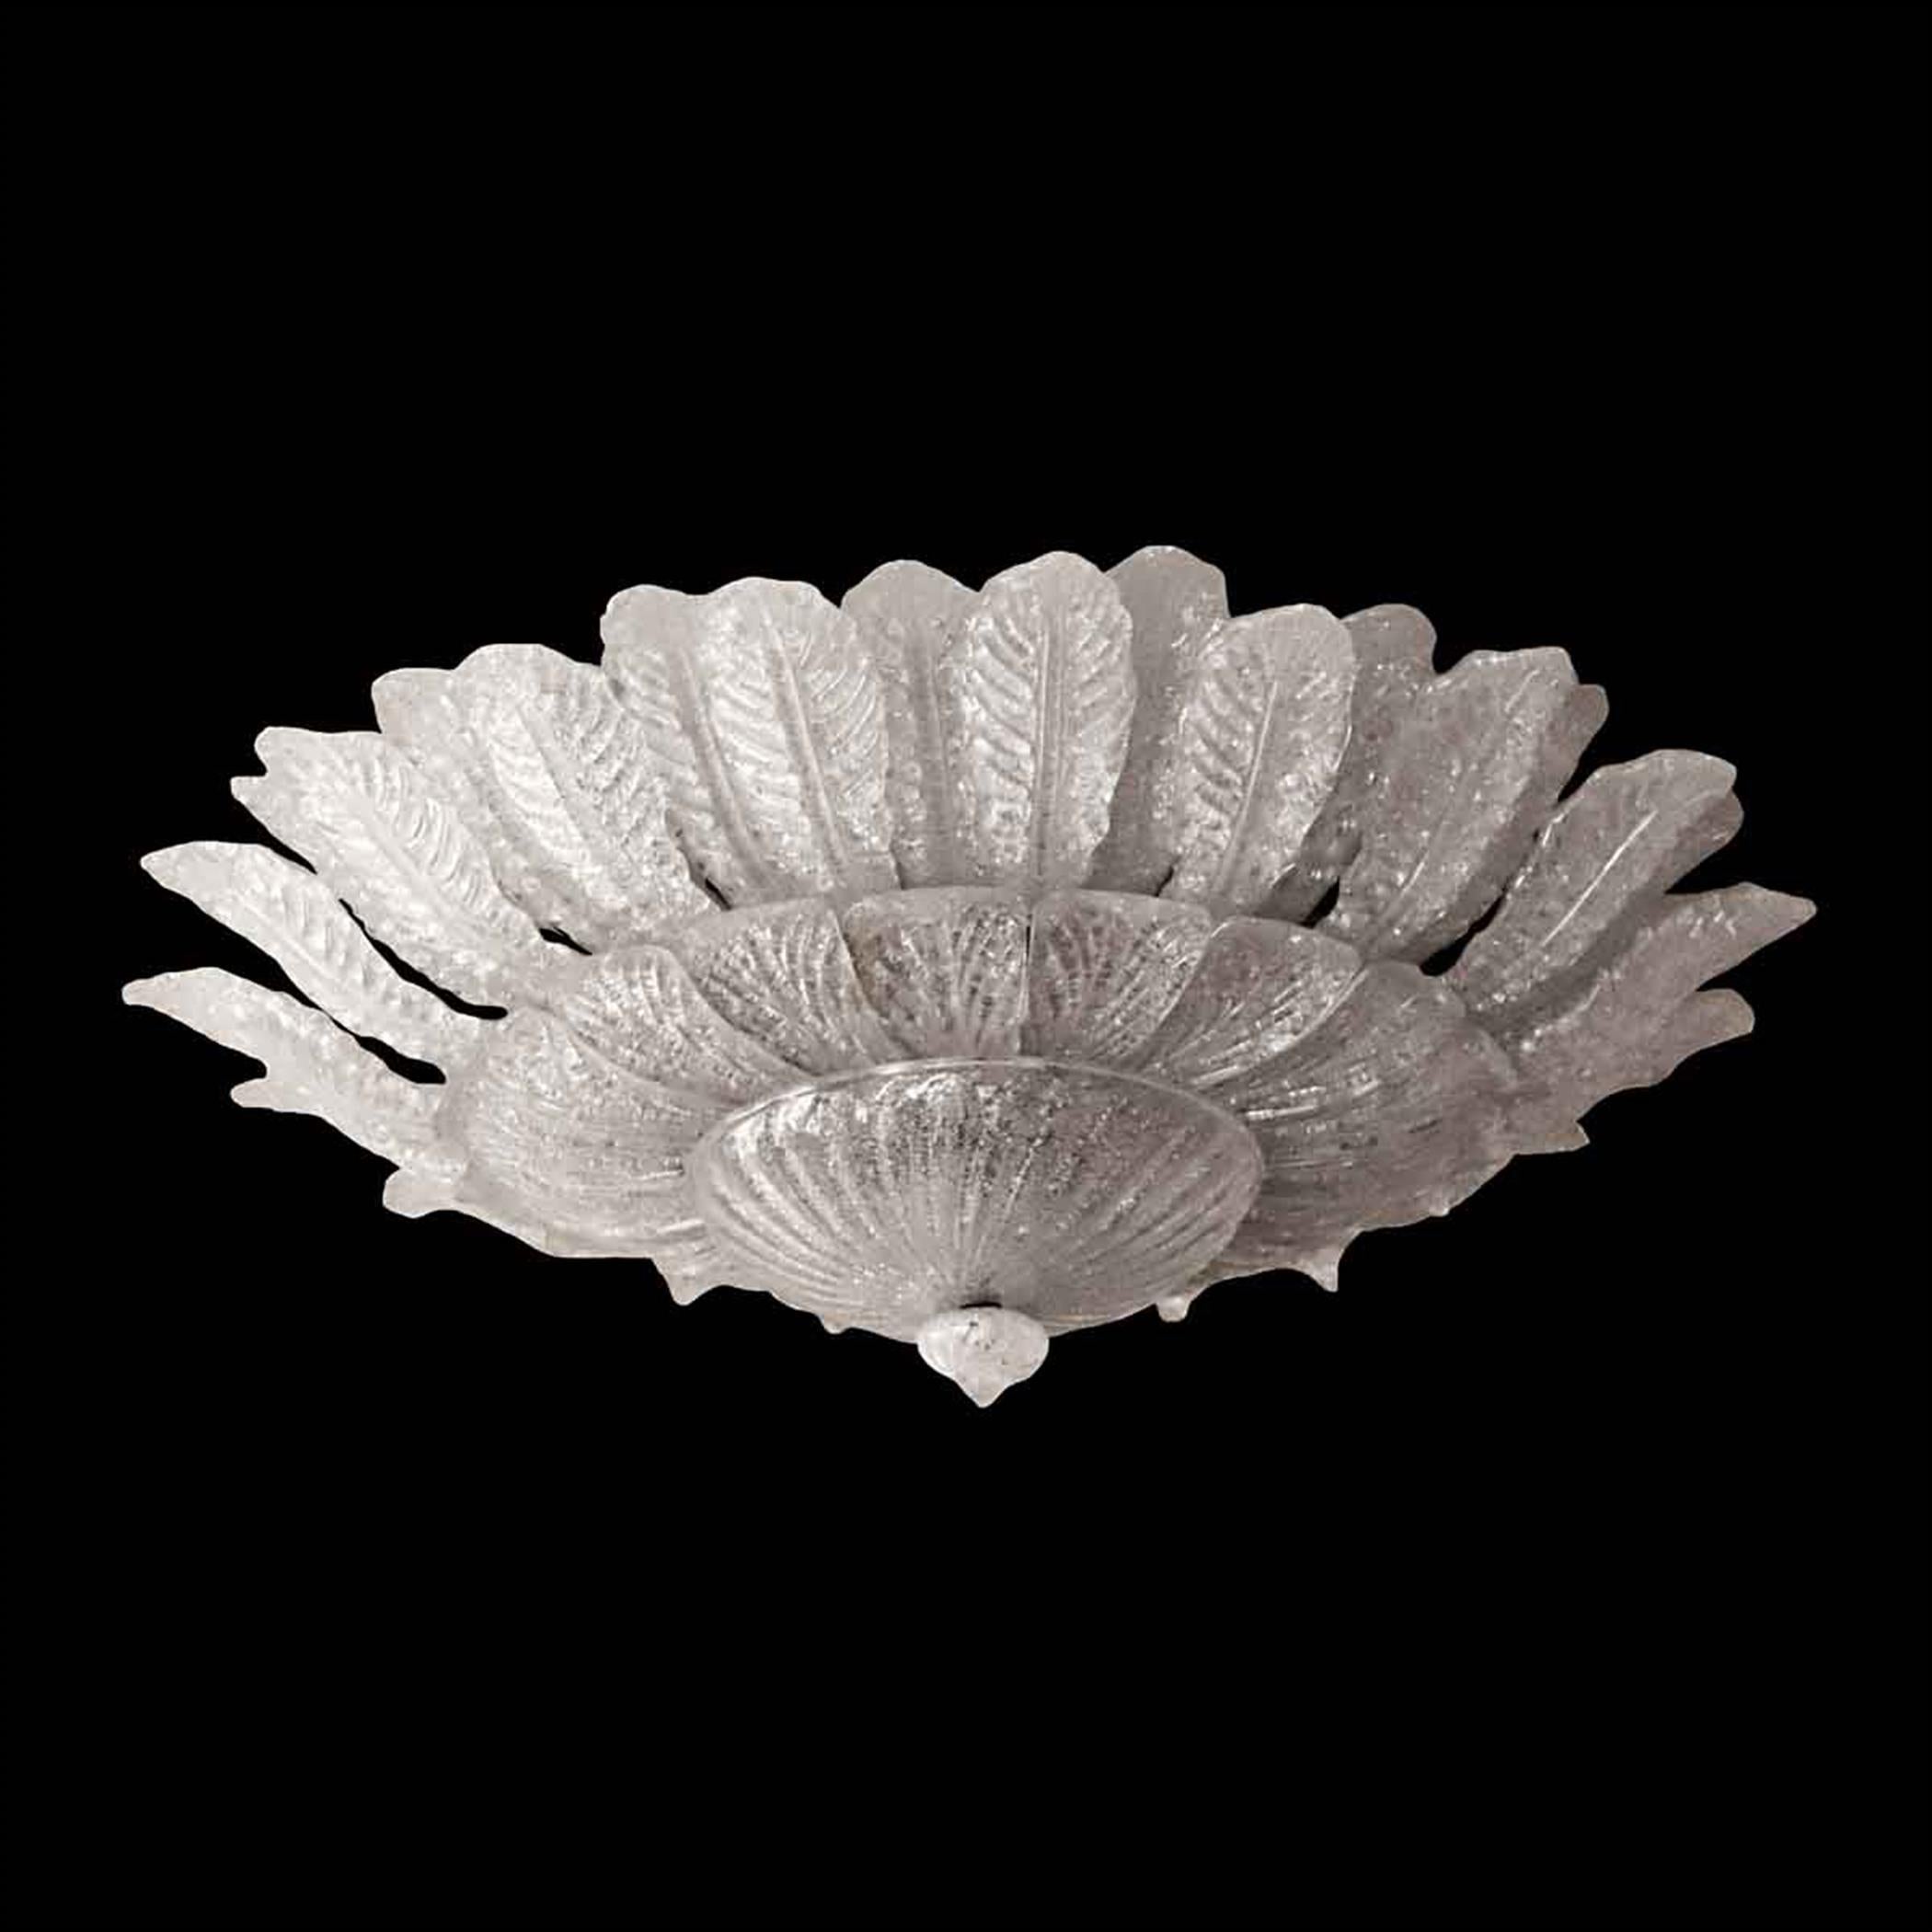 Barovier & Toso Italian Venetian hand formed glass flush mount chandelier light fixture. This light features Barovier & Toso's 